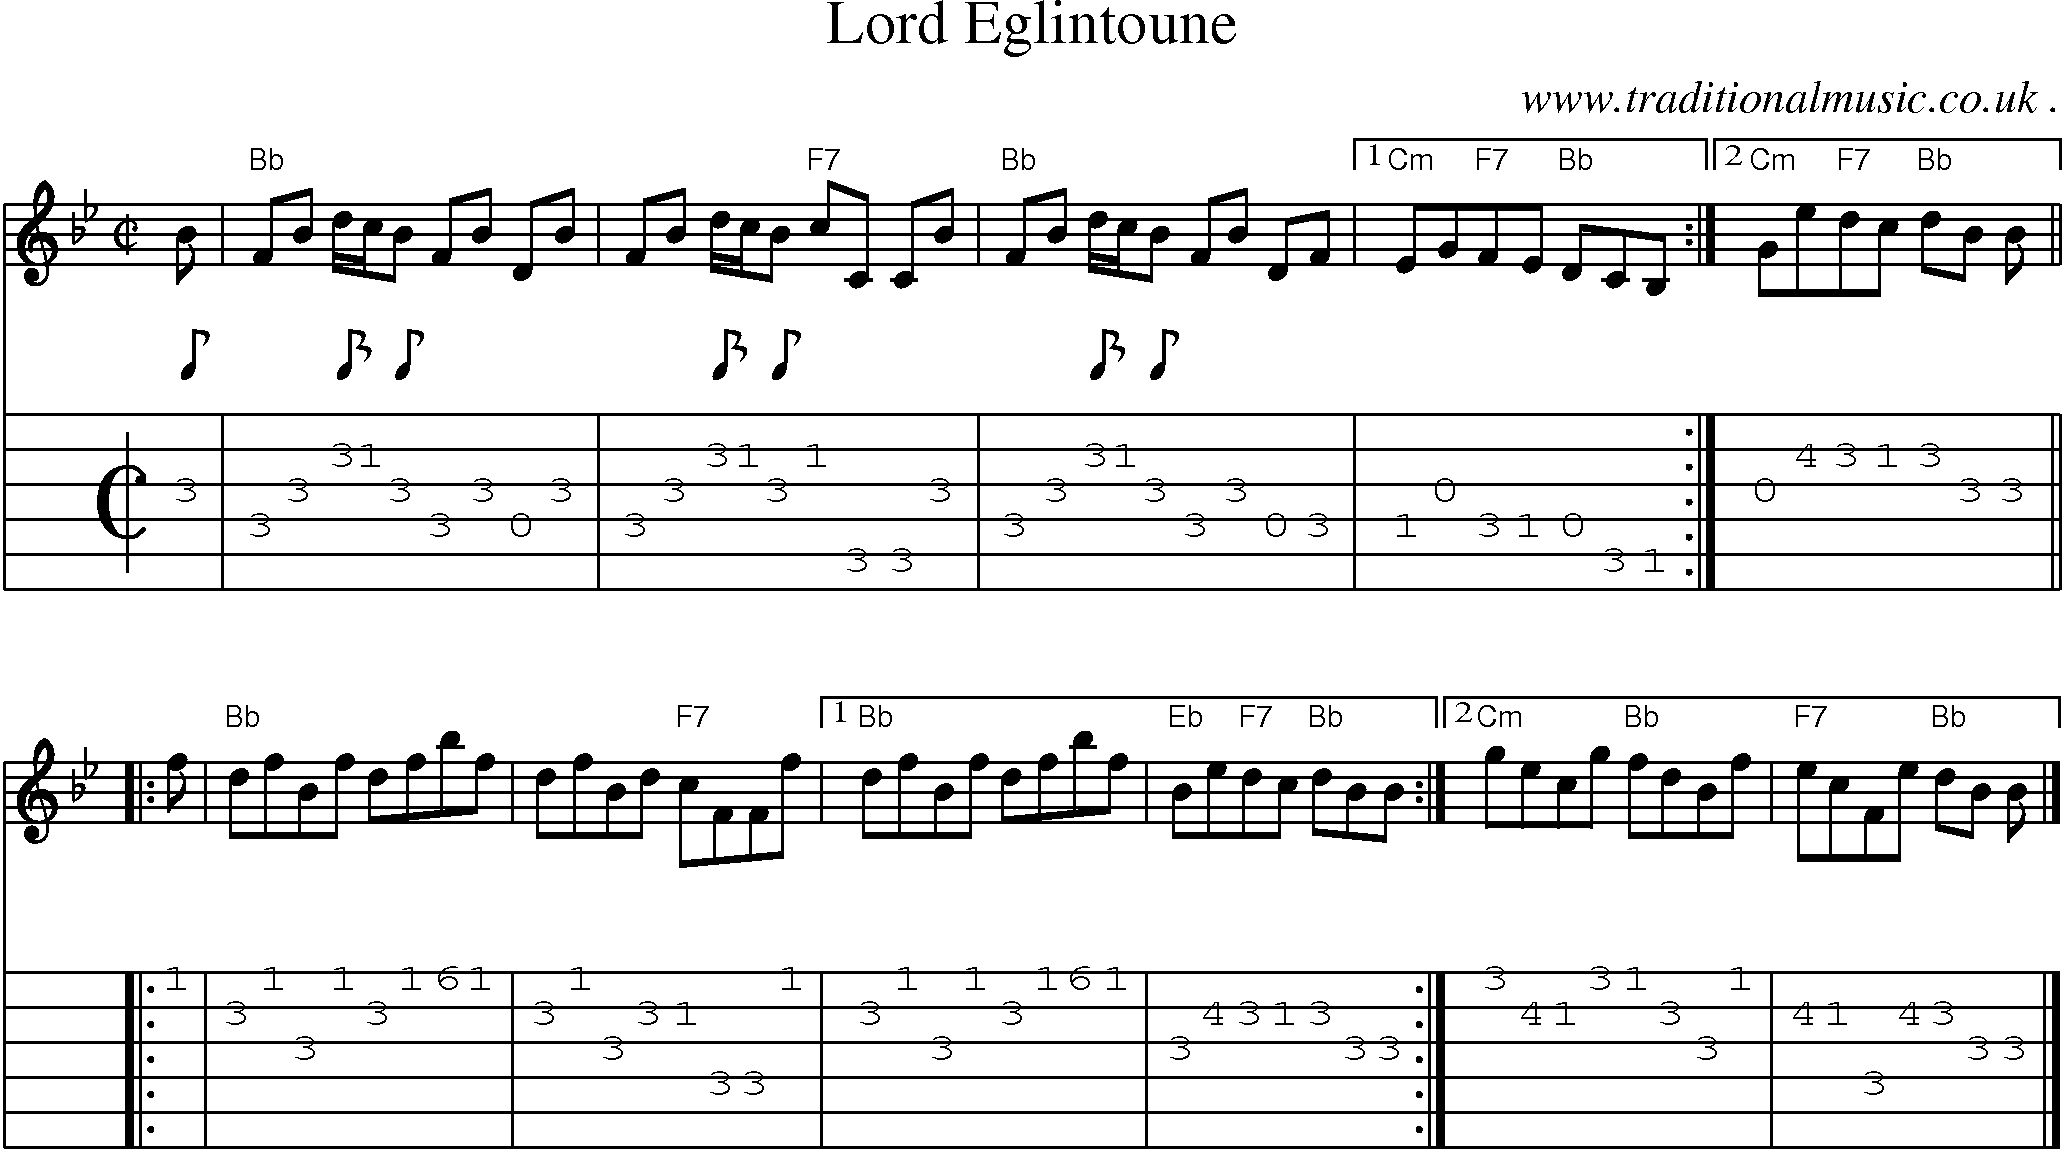 Sheet-music  score, Chords and Guitar Tabs for Lord Eglintoune